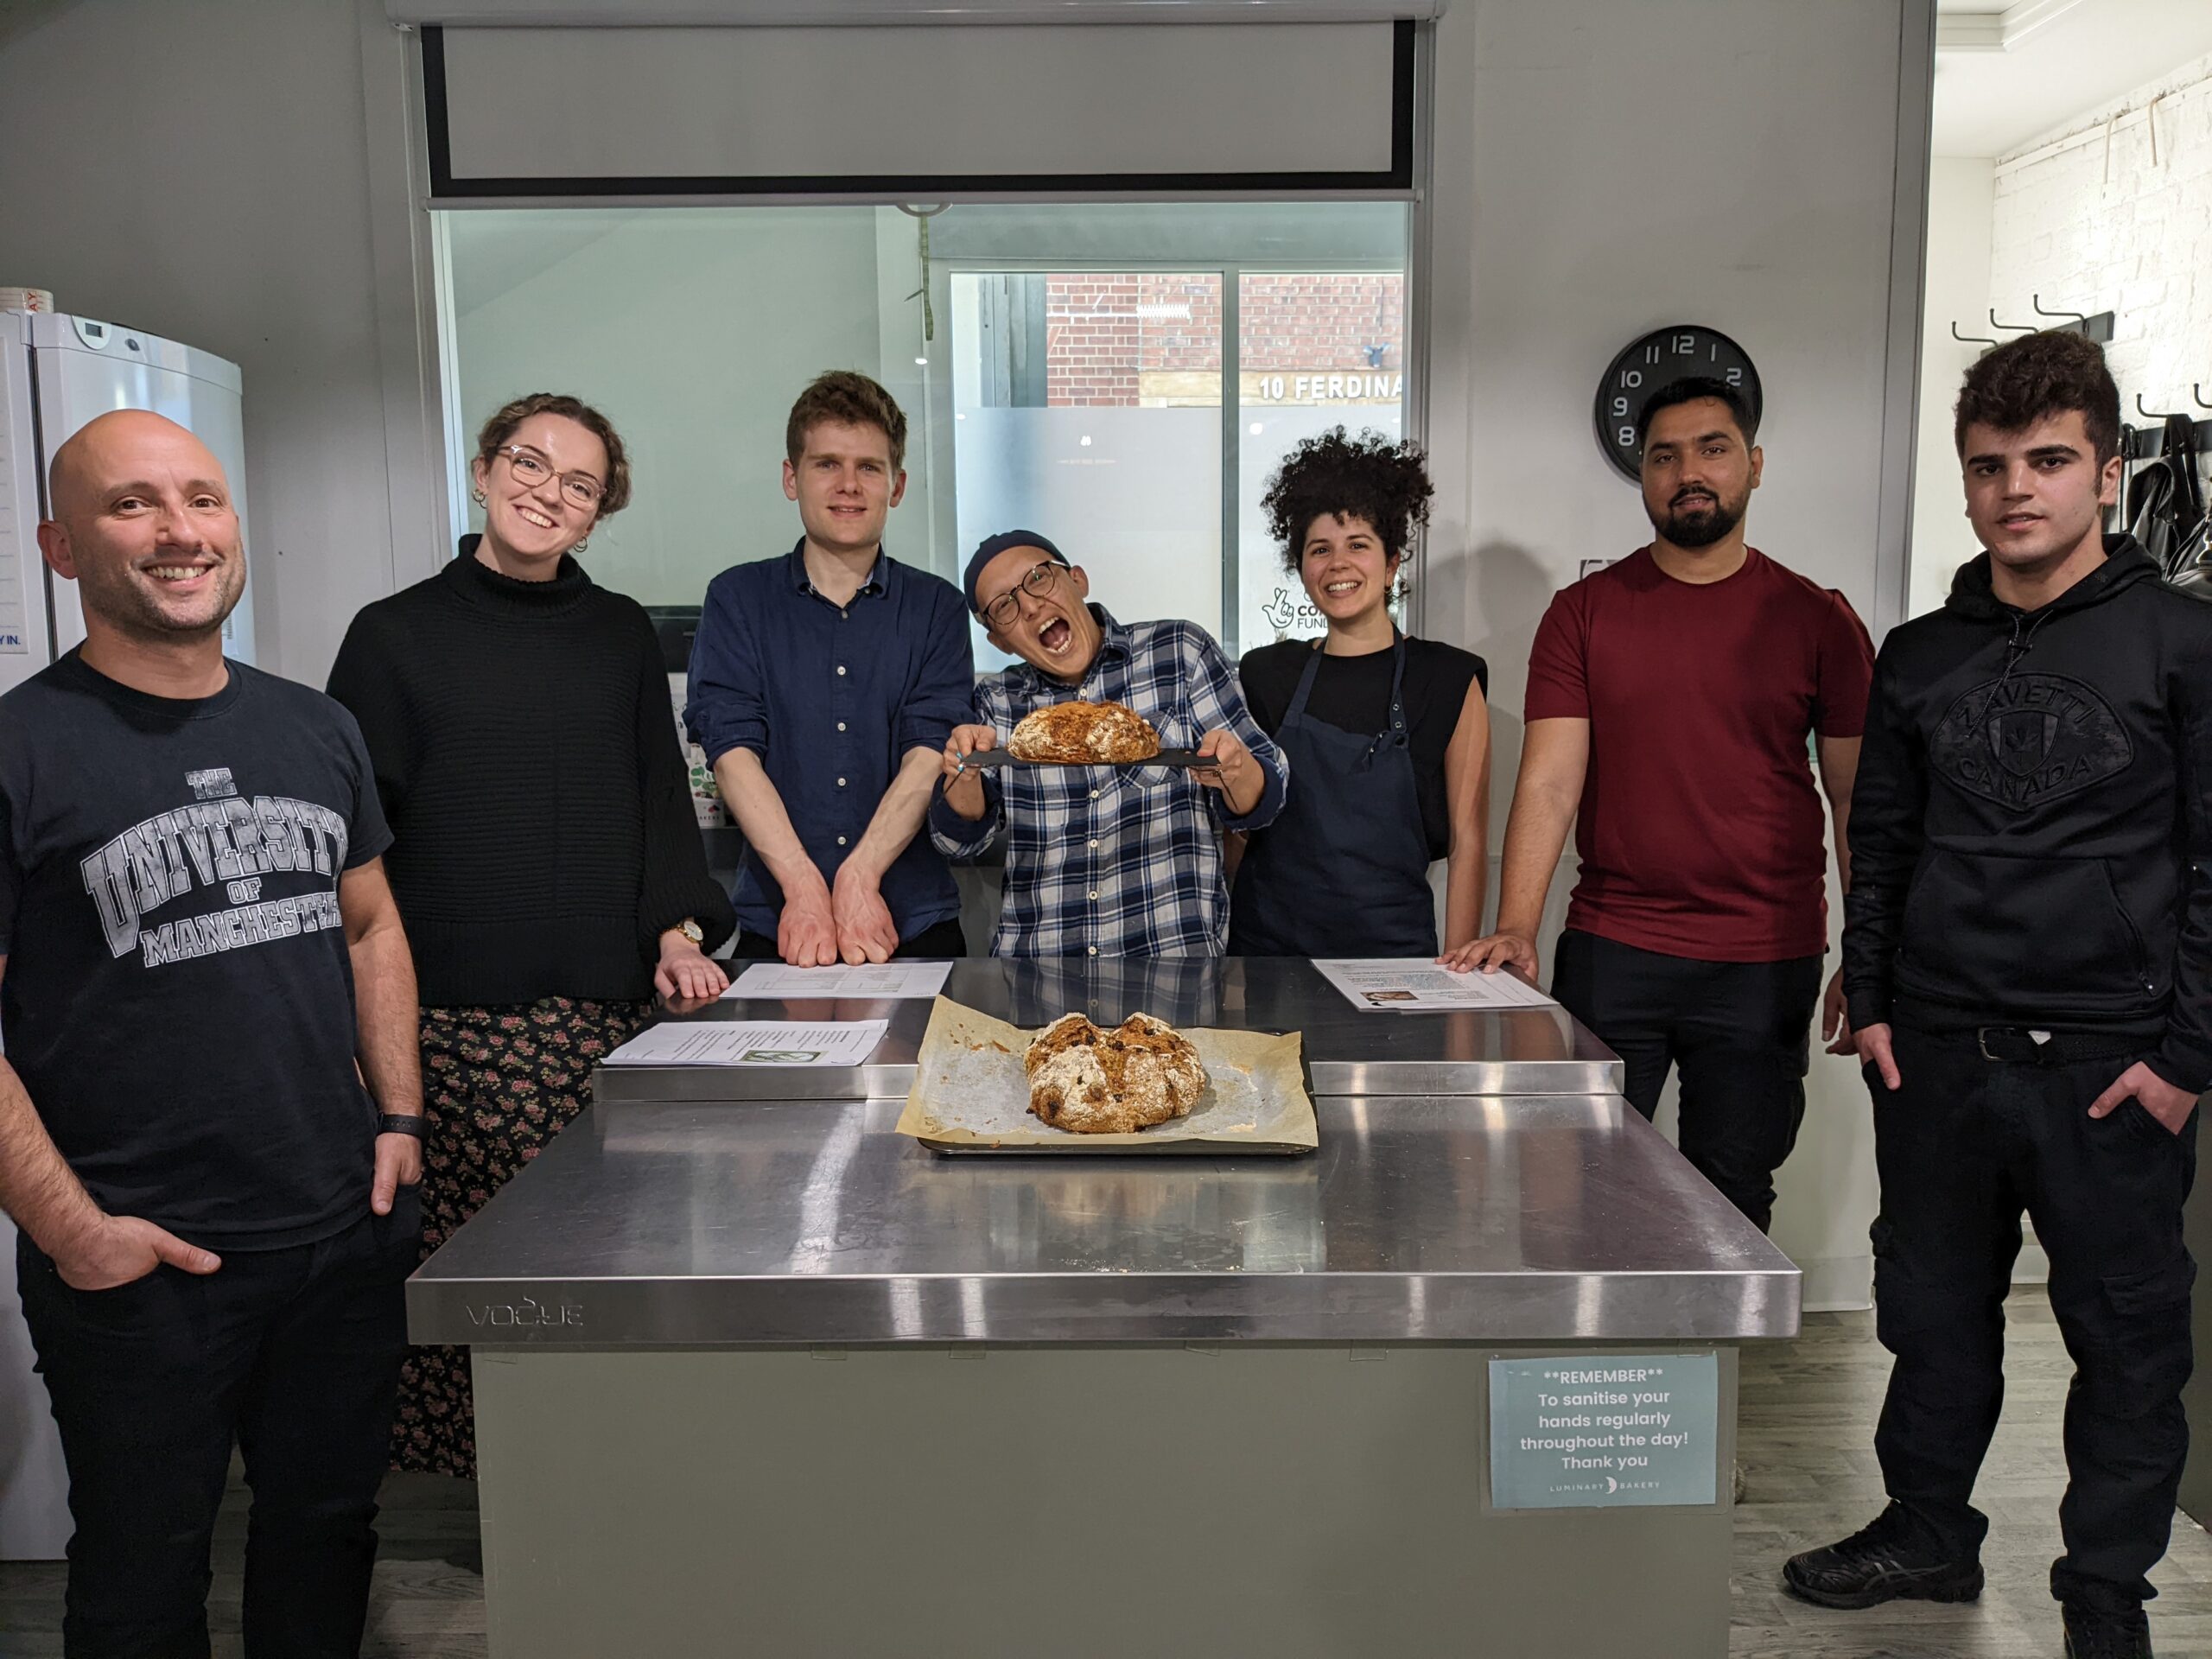 Befrienders and young people stand around a kitchen table, with bread they have cooked together.